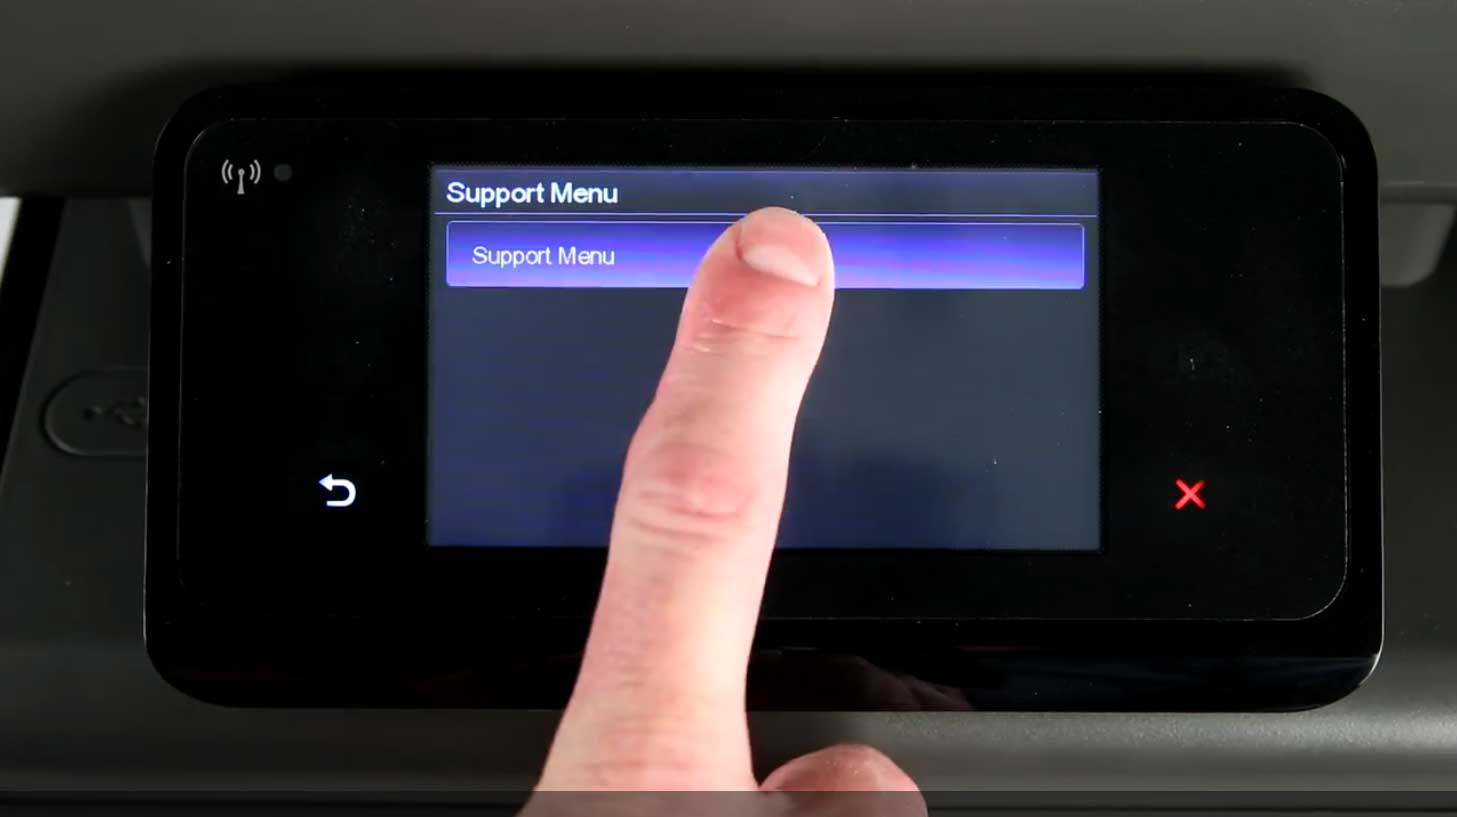 Press the Support Menu item on your HP OfficeJet Pro X476dn/dw MFP display.